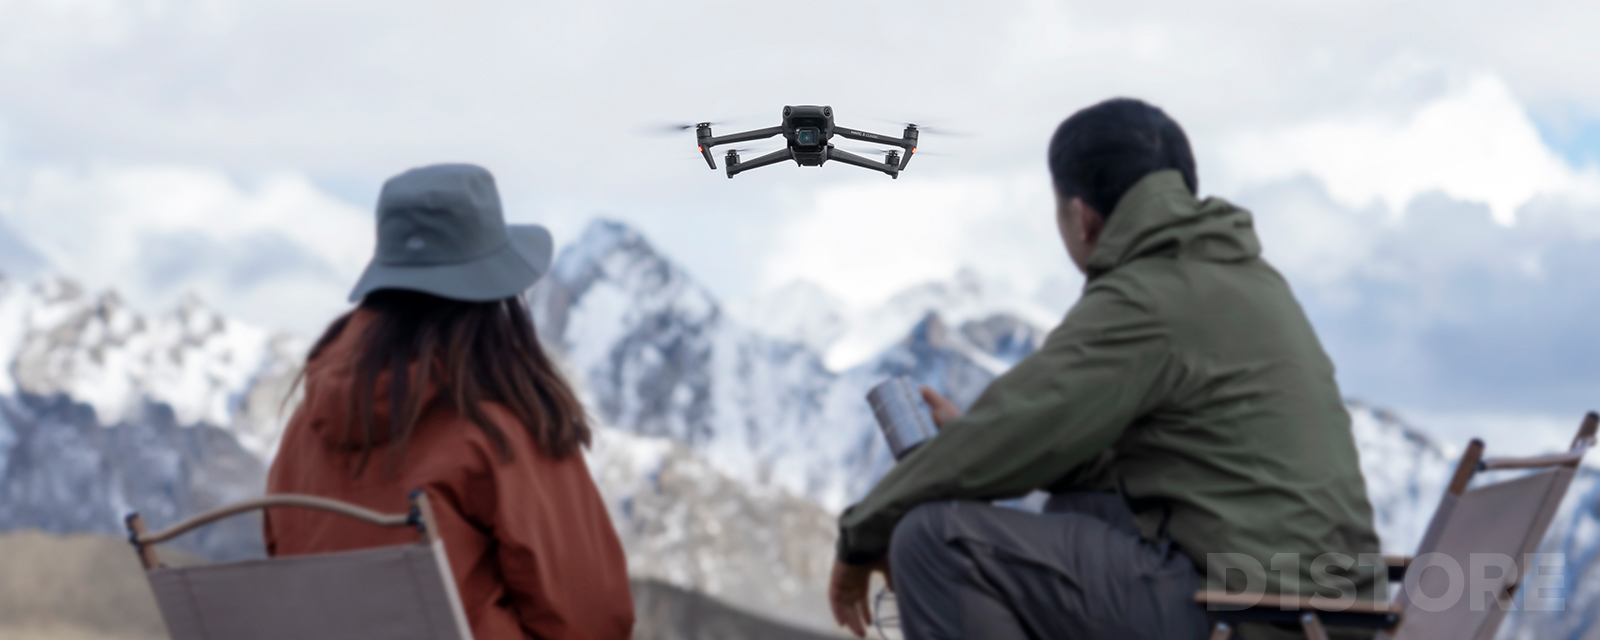 How To Capture Awesome Travel Videos With Your Drone | D1 Lounge